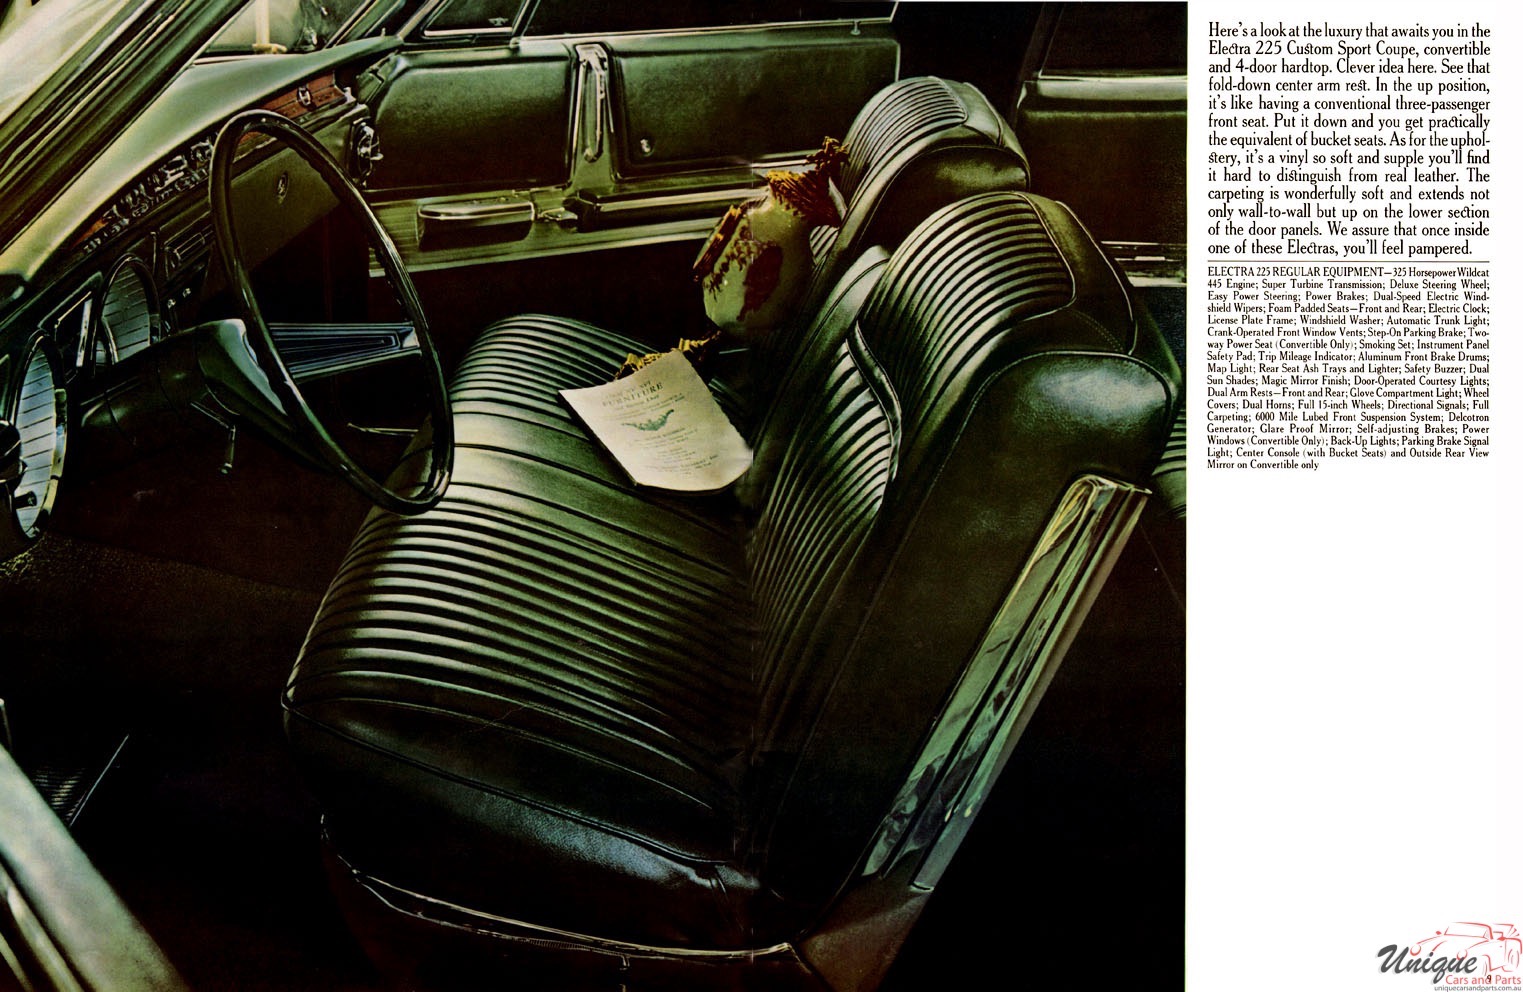 1965 Buick Full-Line All Models Brochure Page 17